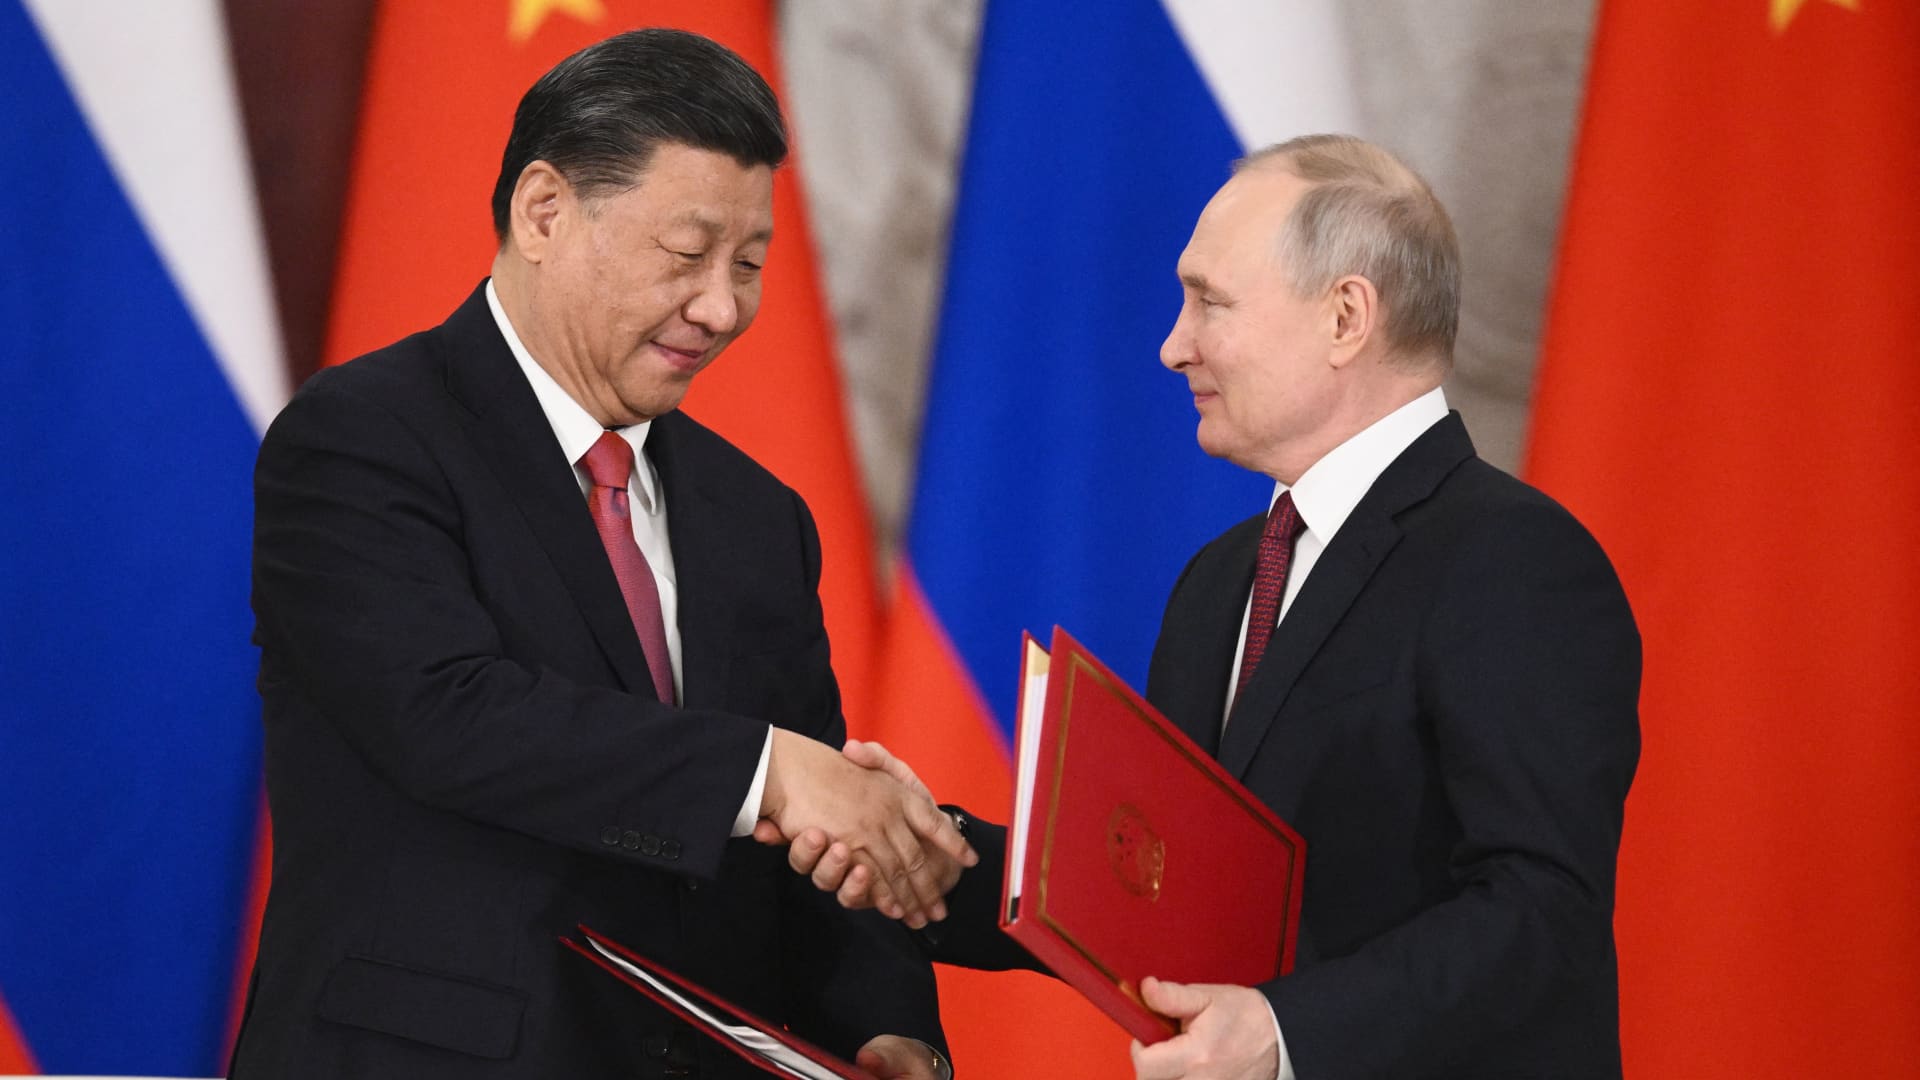 Russian President Vladimir Putin and Chinese President Xi Jinping at a signing ceremony after their talks at the Kremlin in Moscow on March 21, 2023.